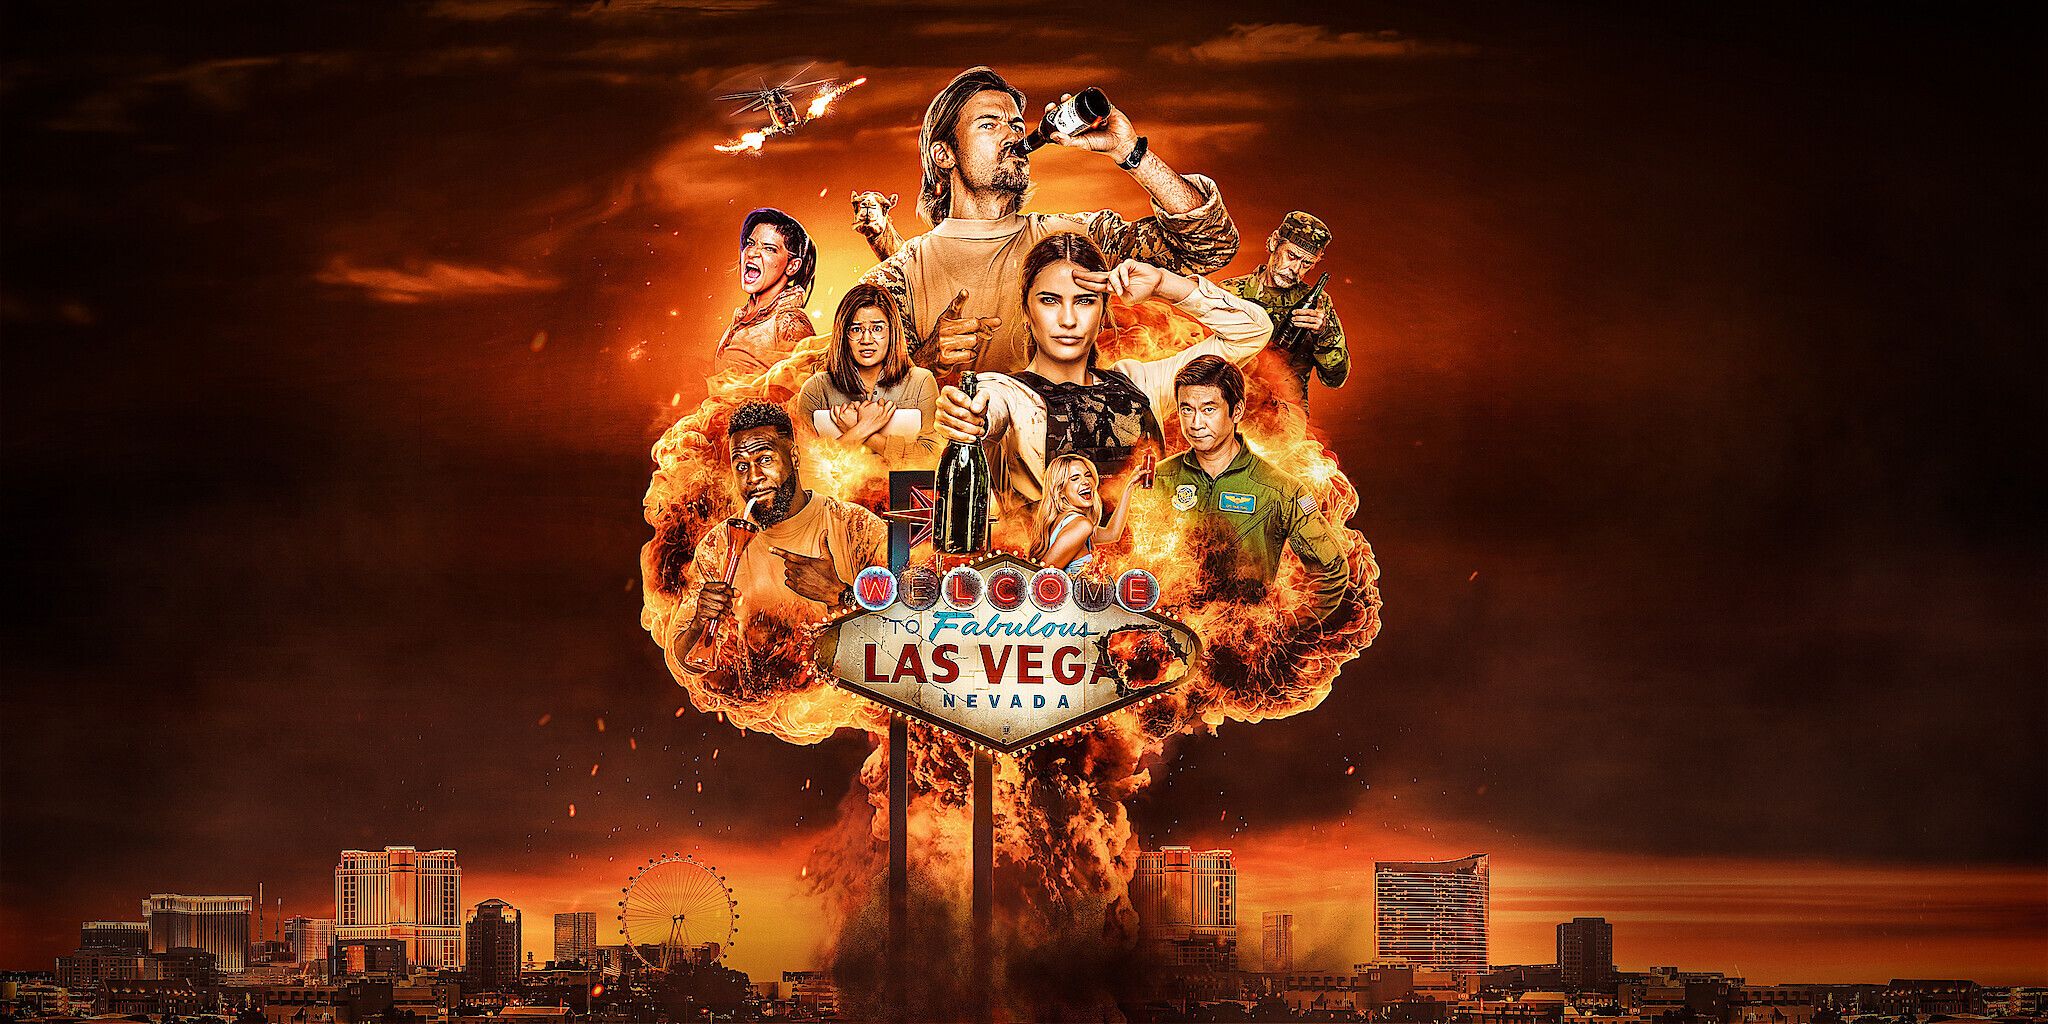 The Obliterated cast hovers over Las Vegas